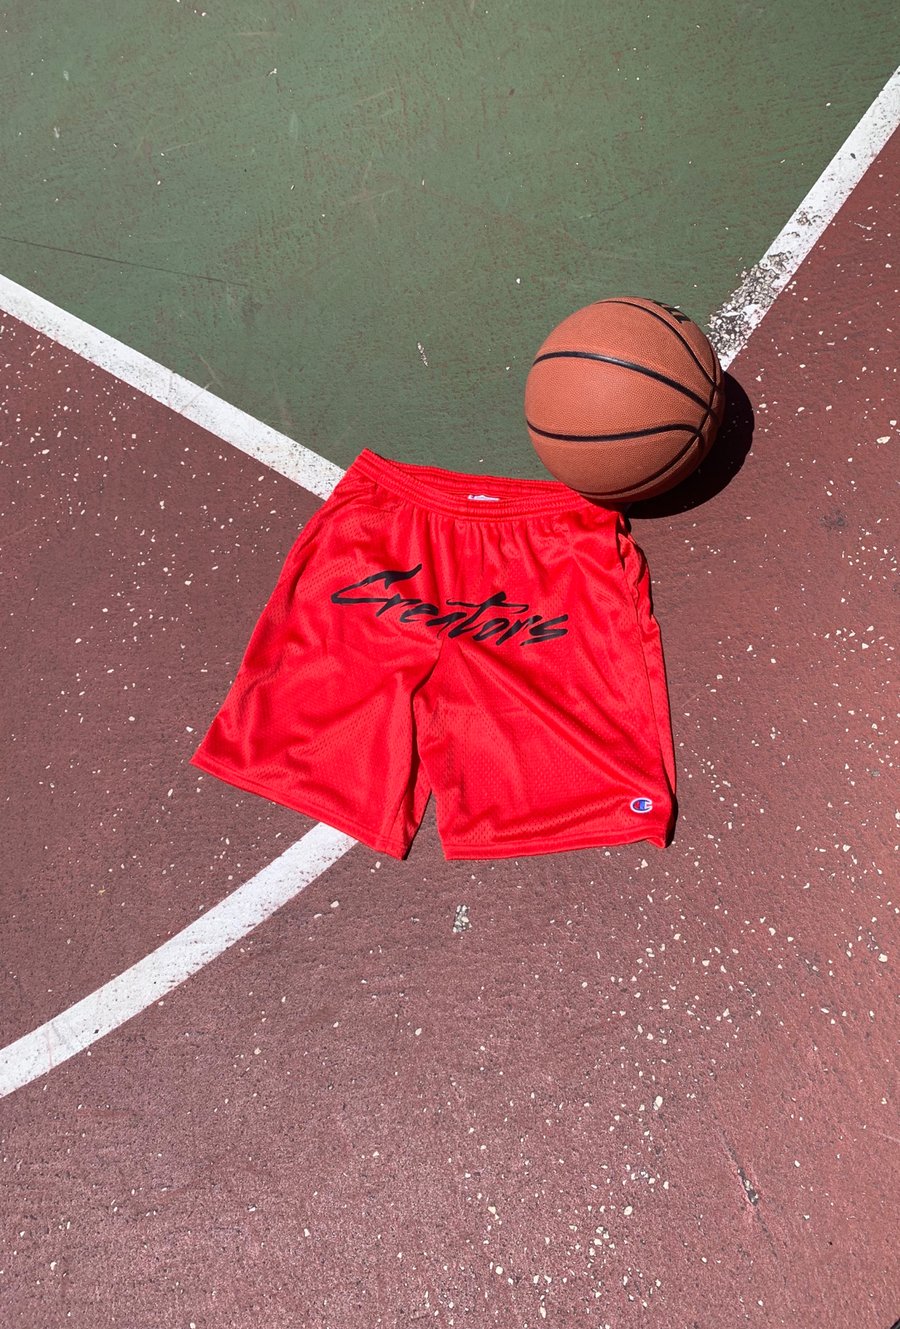 Image of Creators Court Shorts - Red